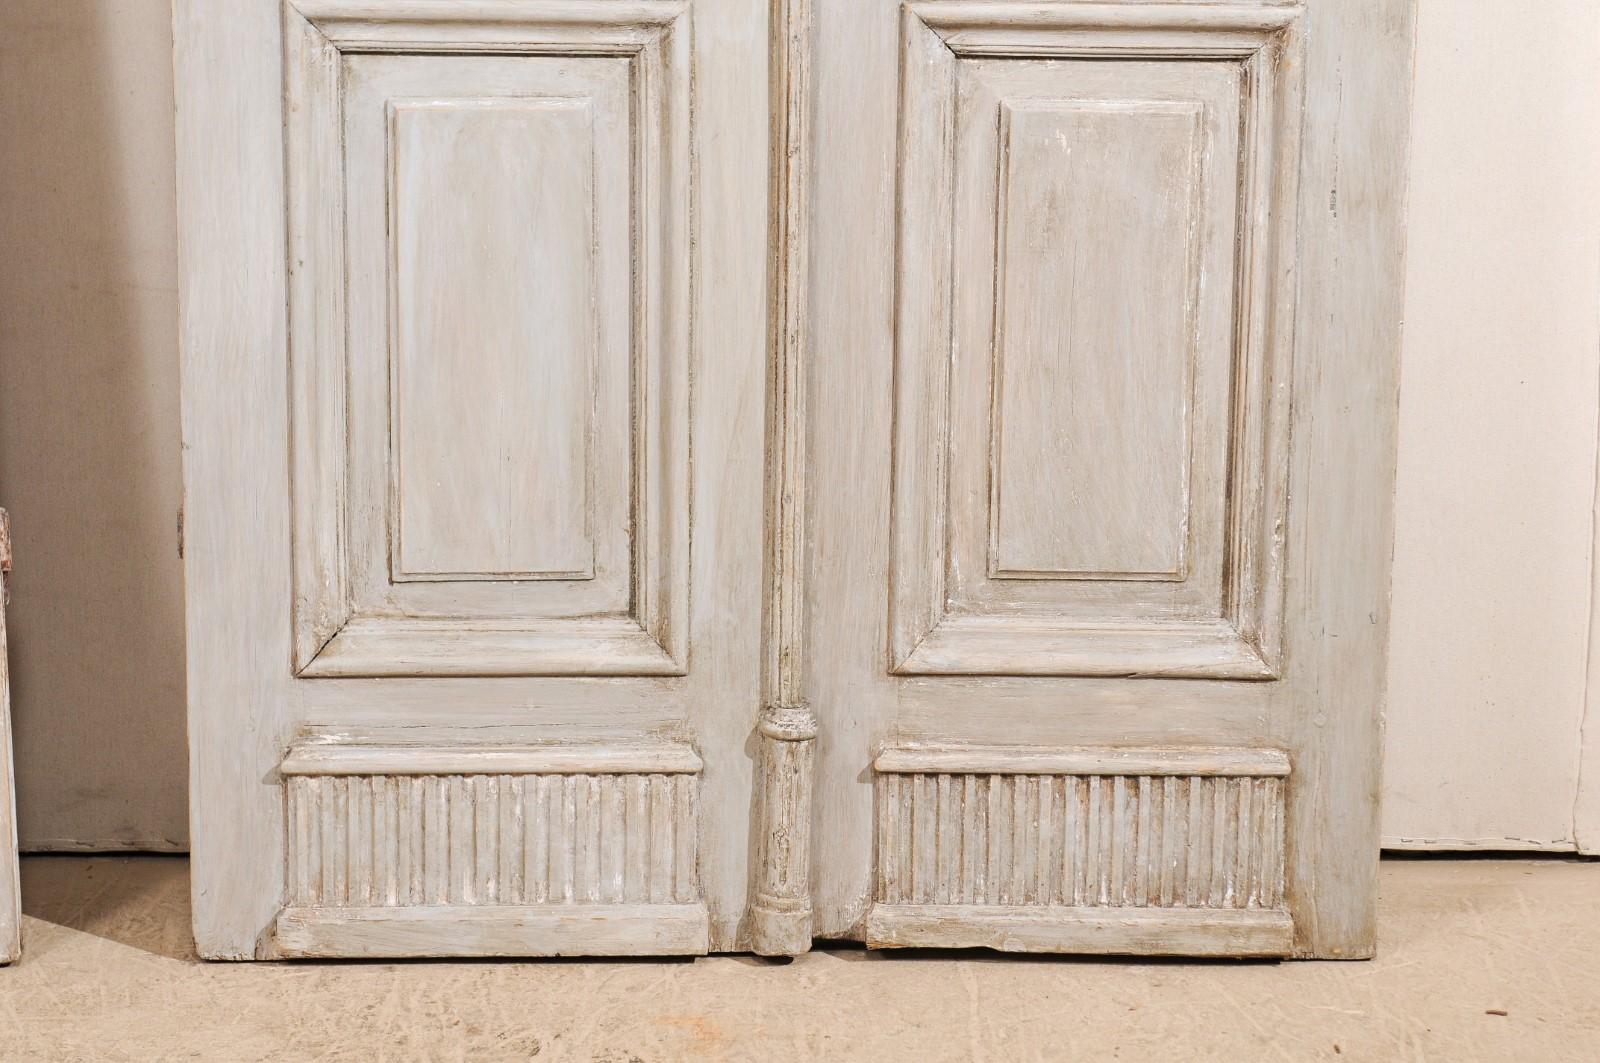 Two Pairs of 19th Century French Painted Wood Doors with Nice Carved Panels 3